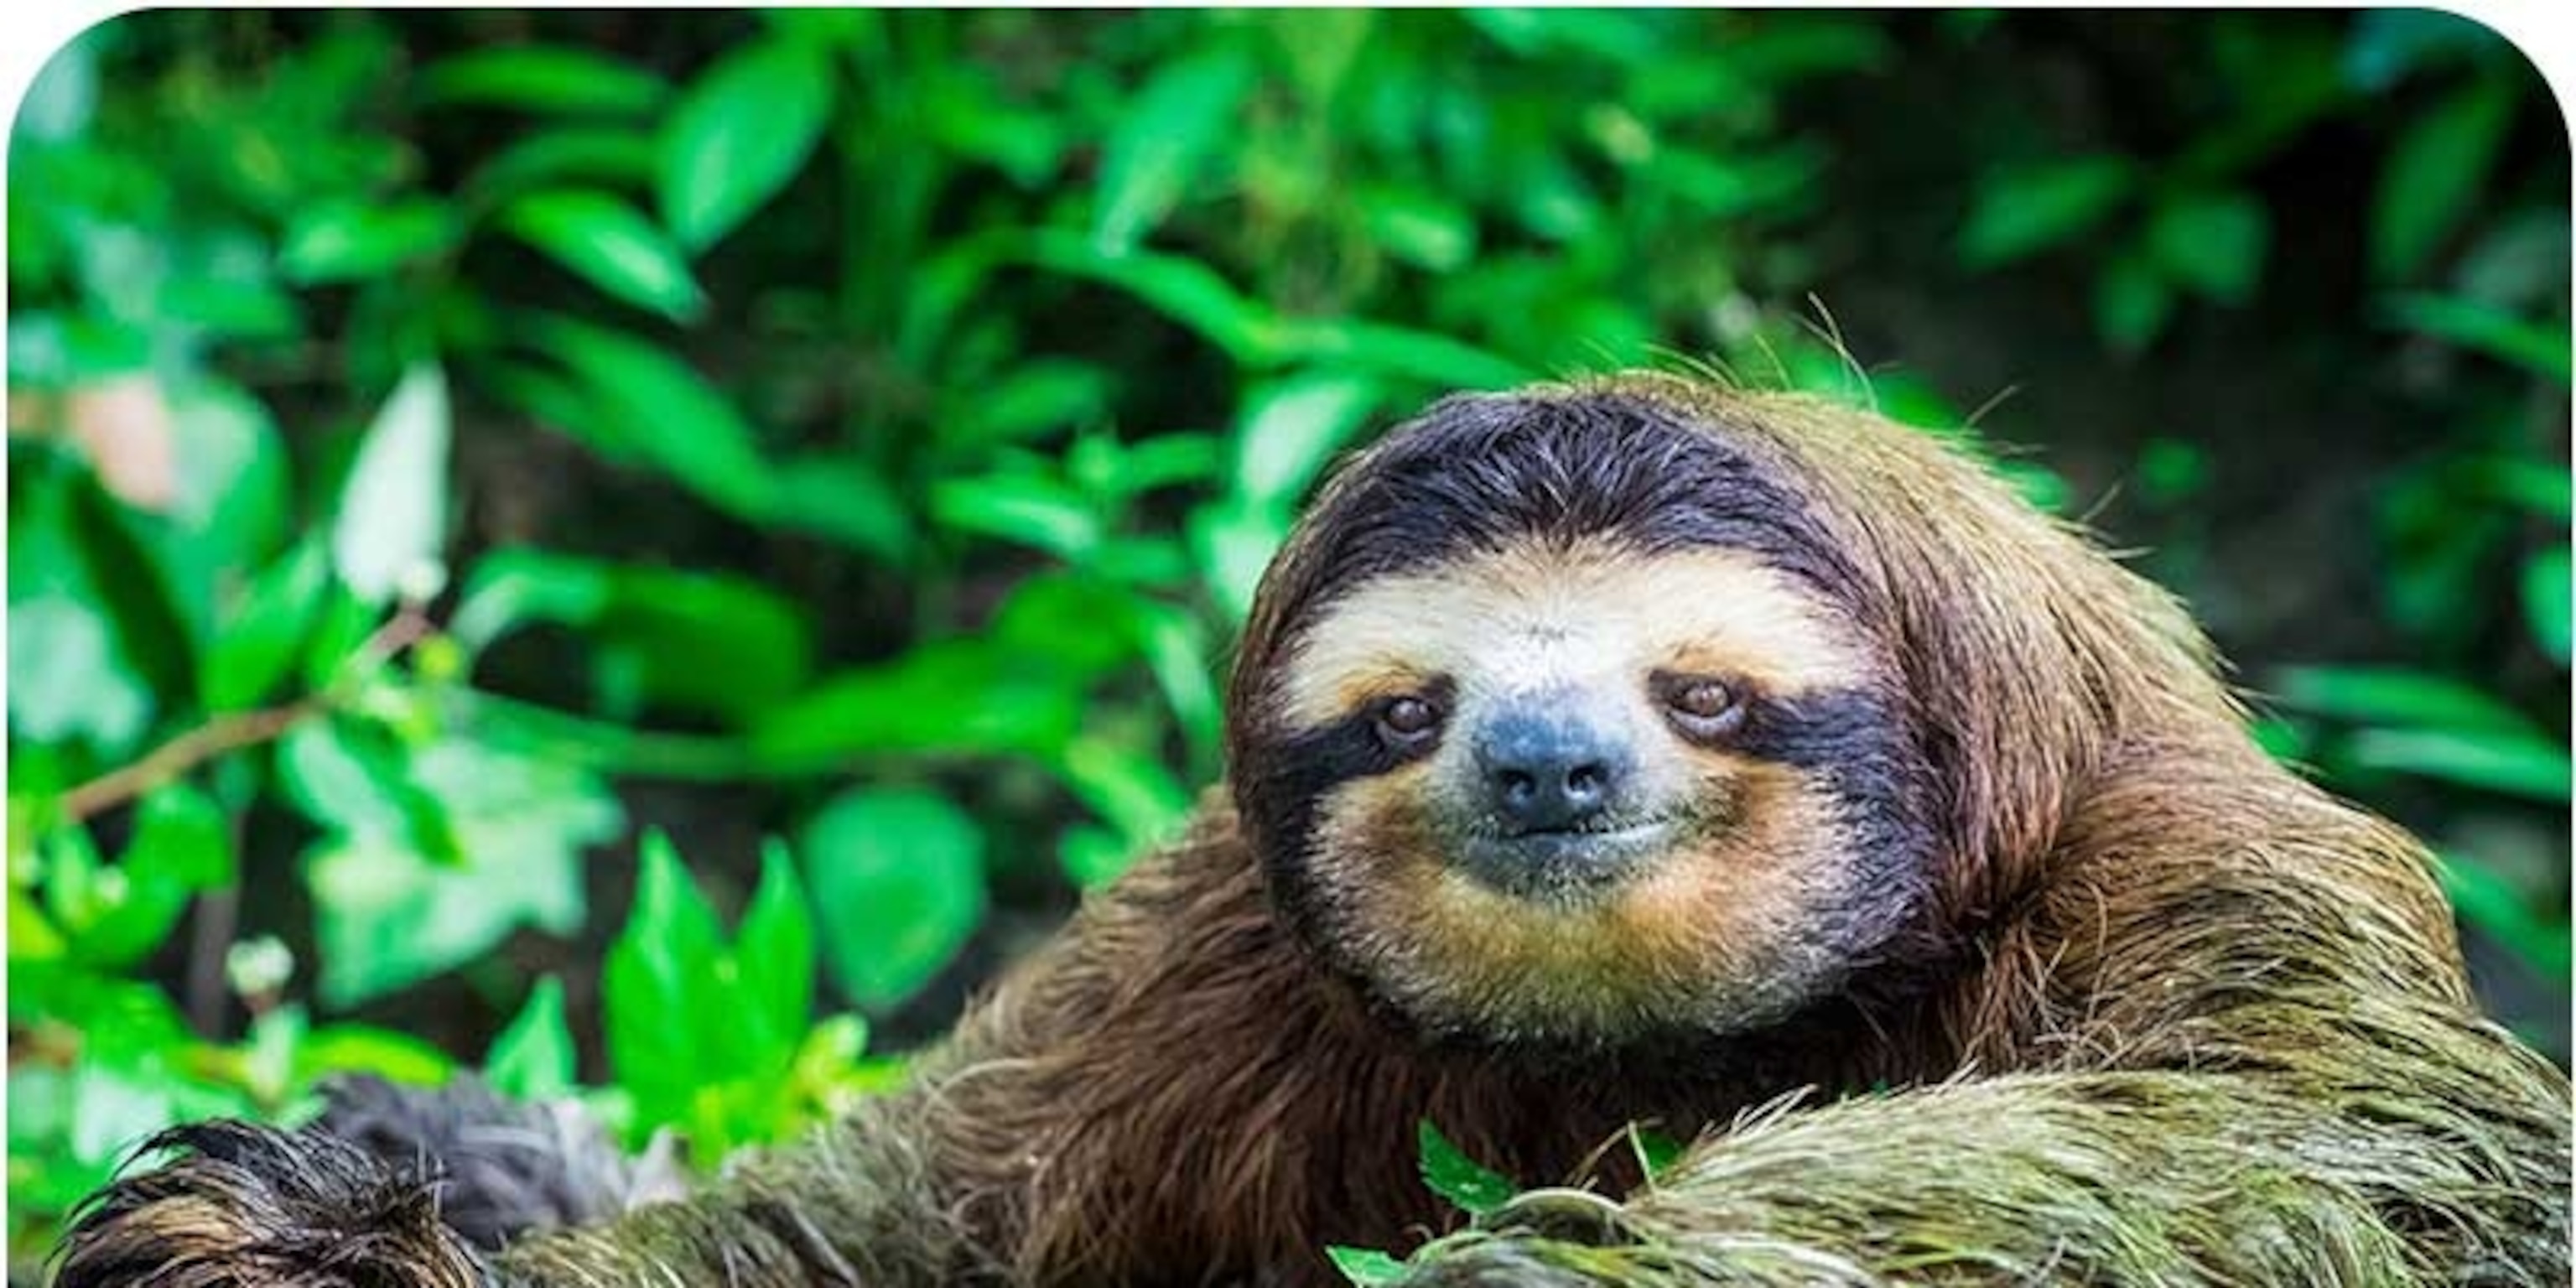 Why sloths are the best animal?